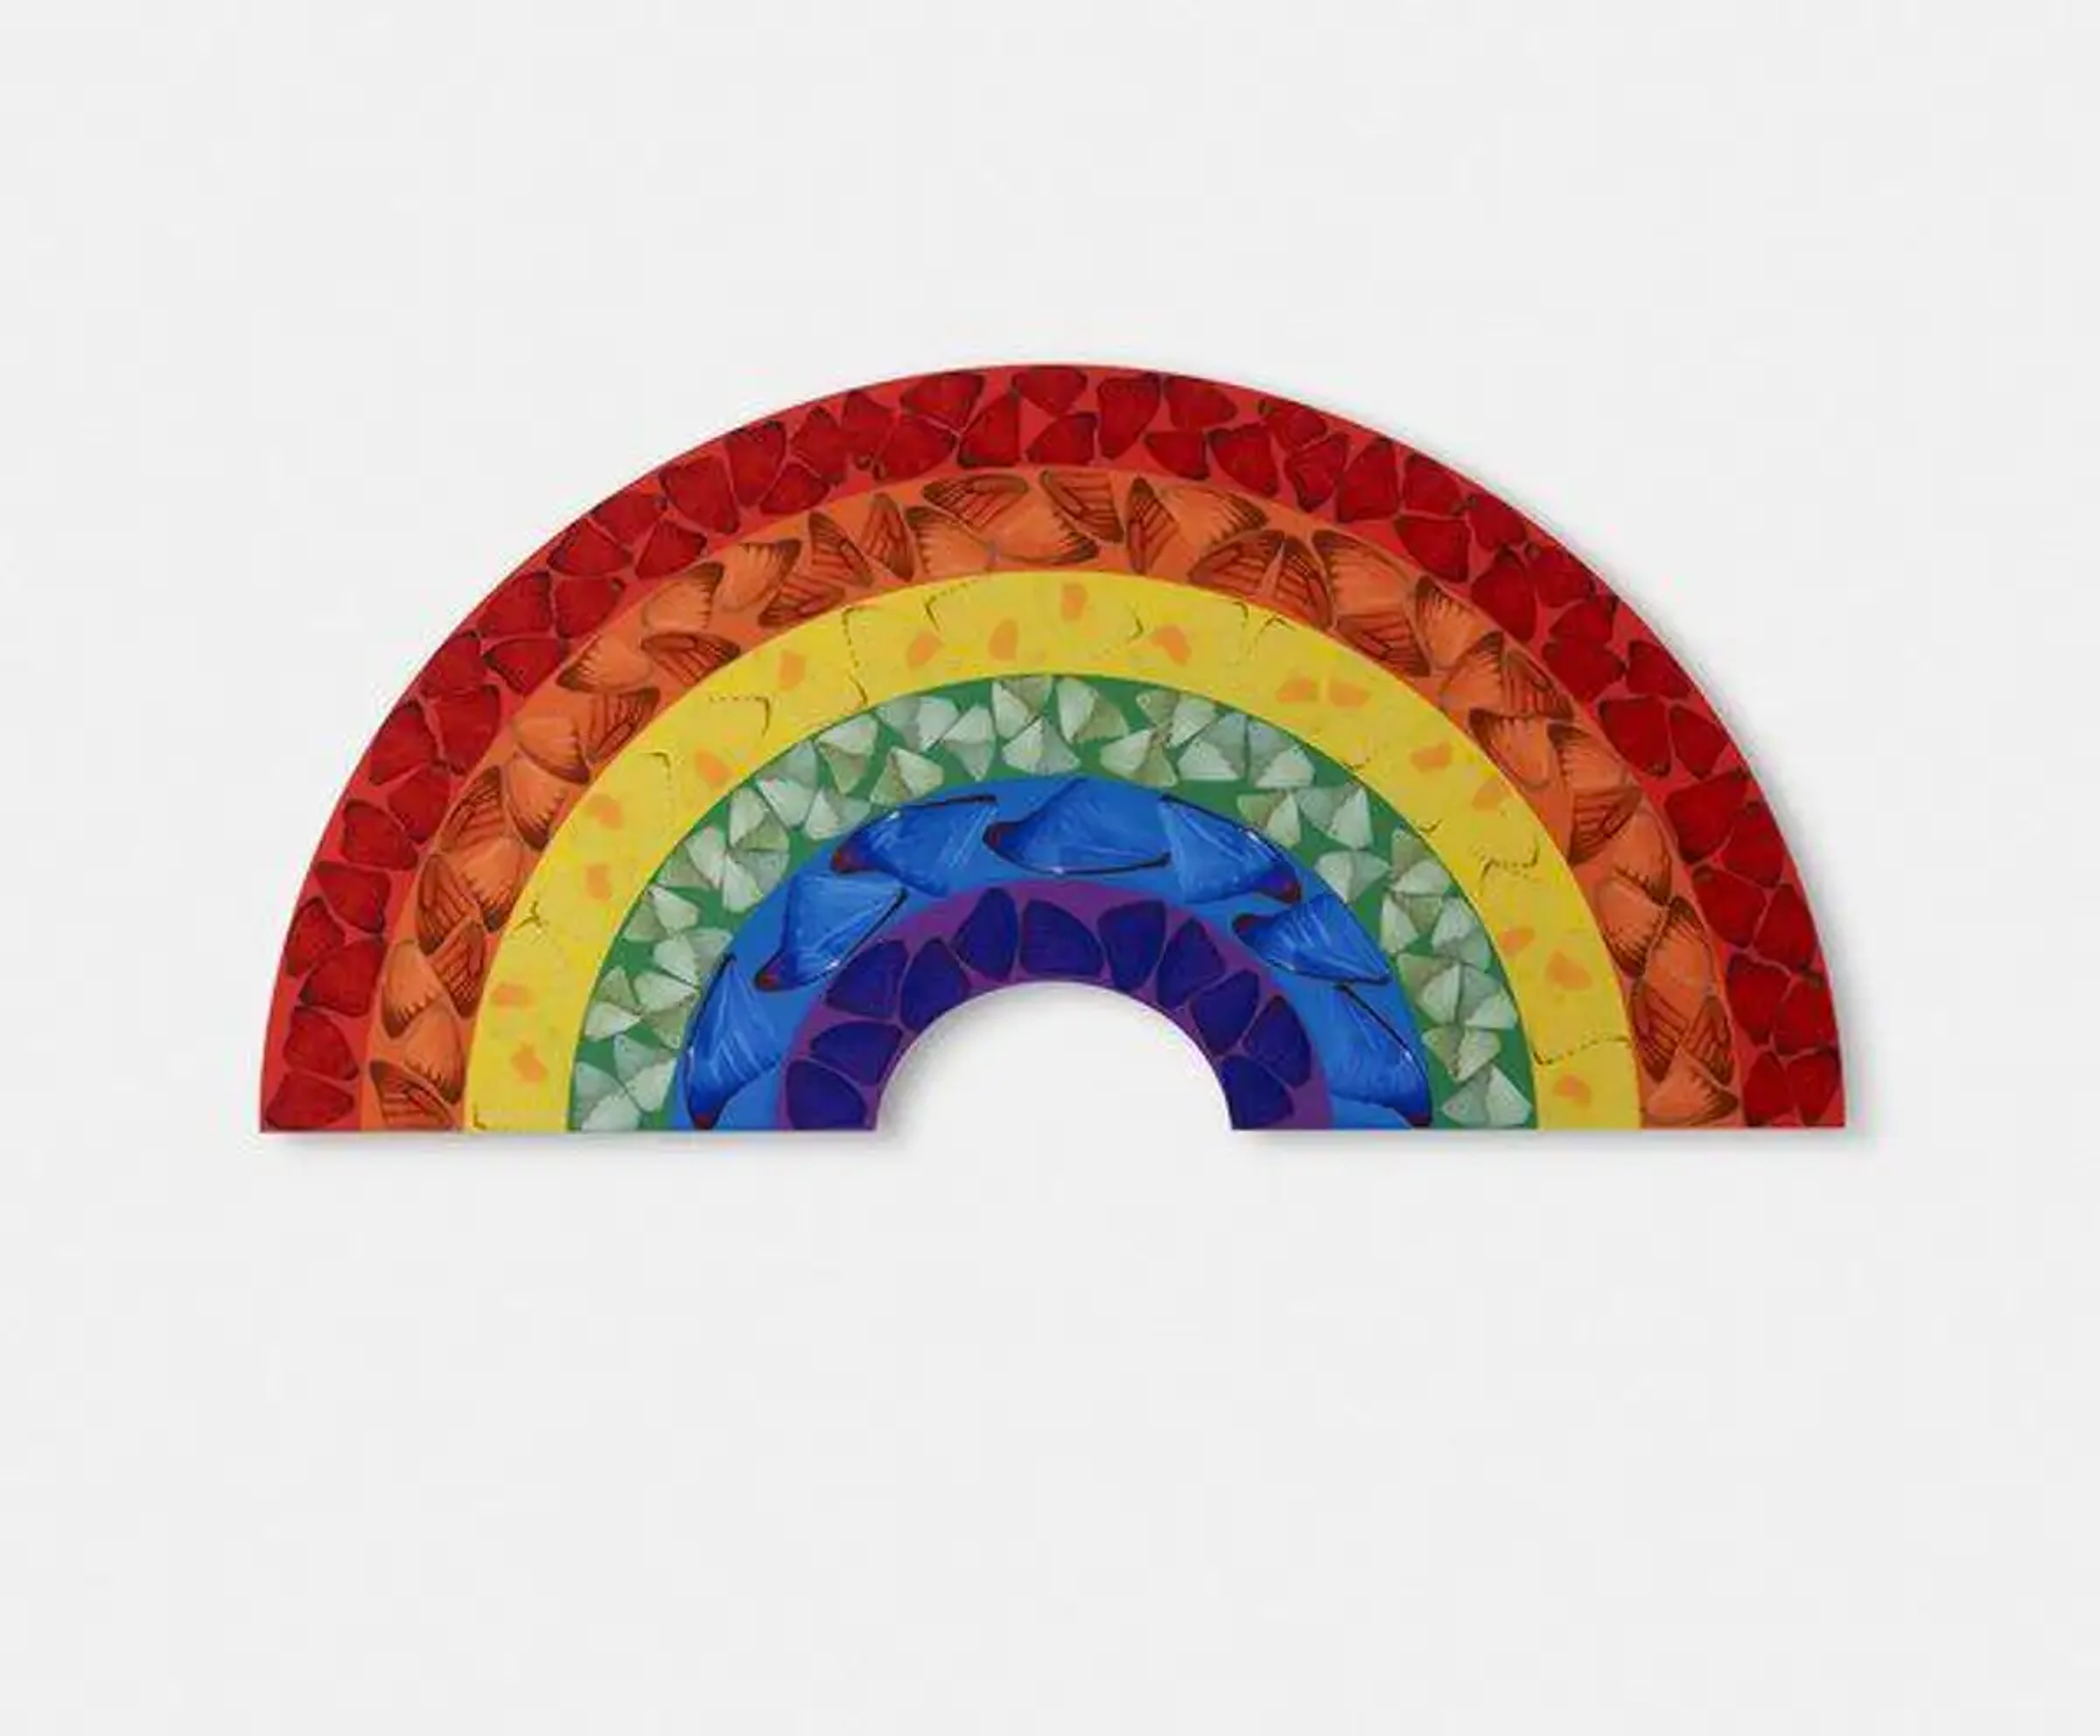 A rainbow against a white background, with colourful butterfly wings in each shade finishing the composition.